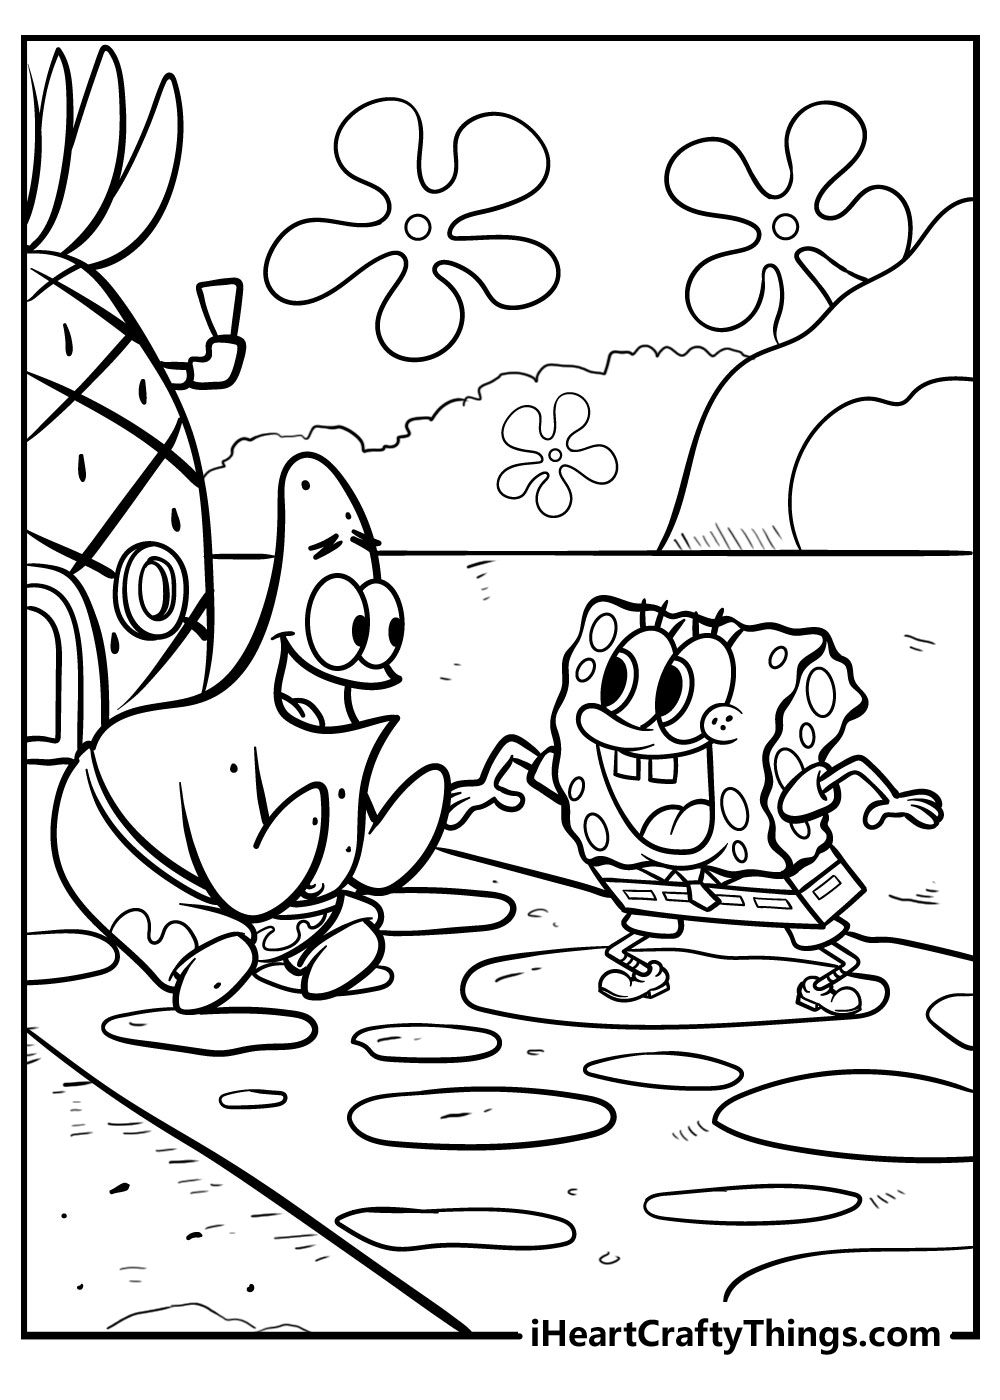 Funny Spongebob Coloring Pages Printables 33